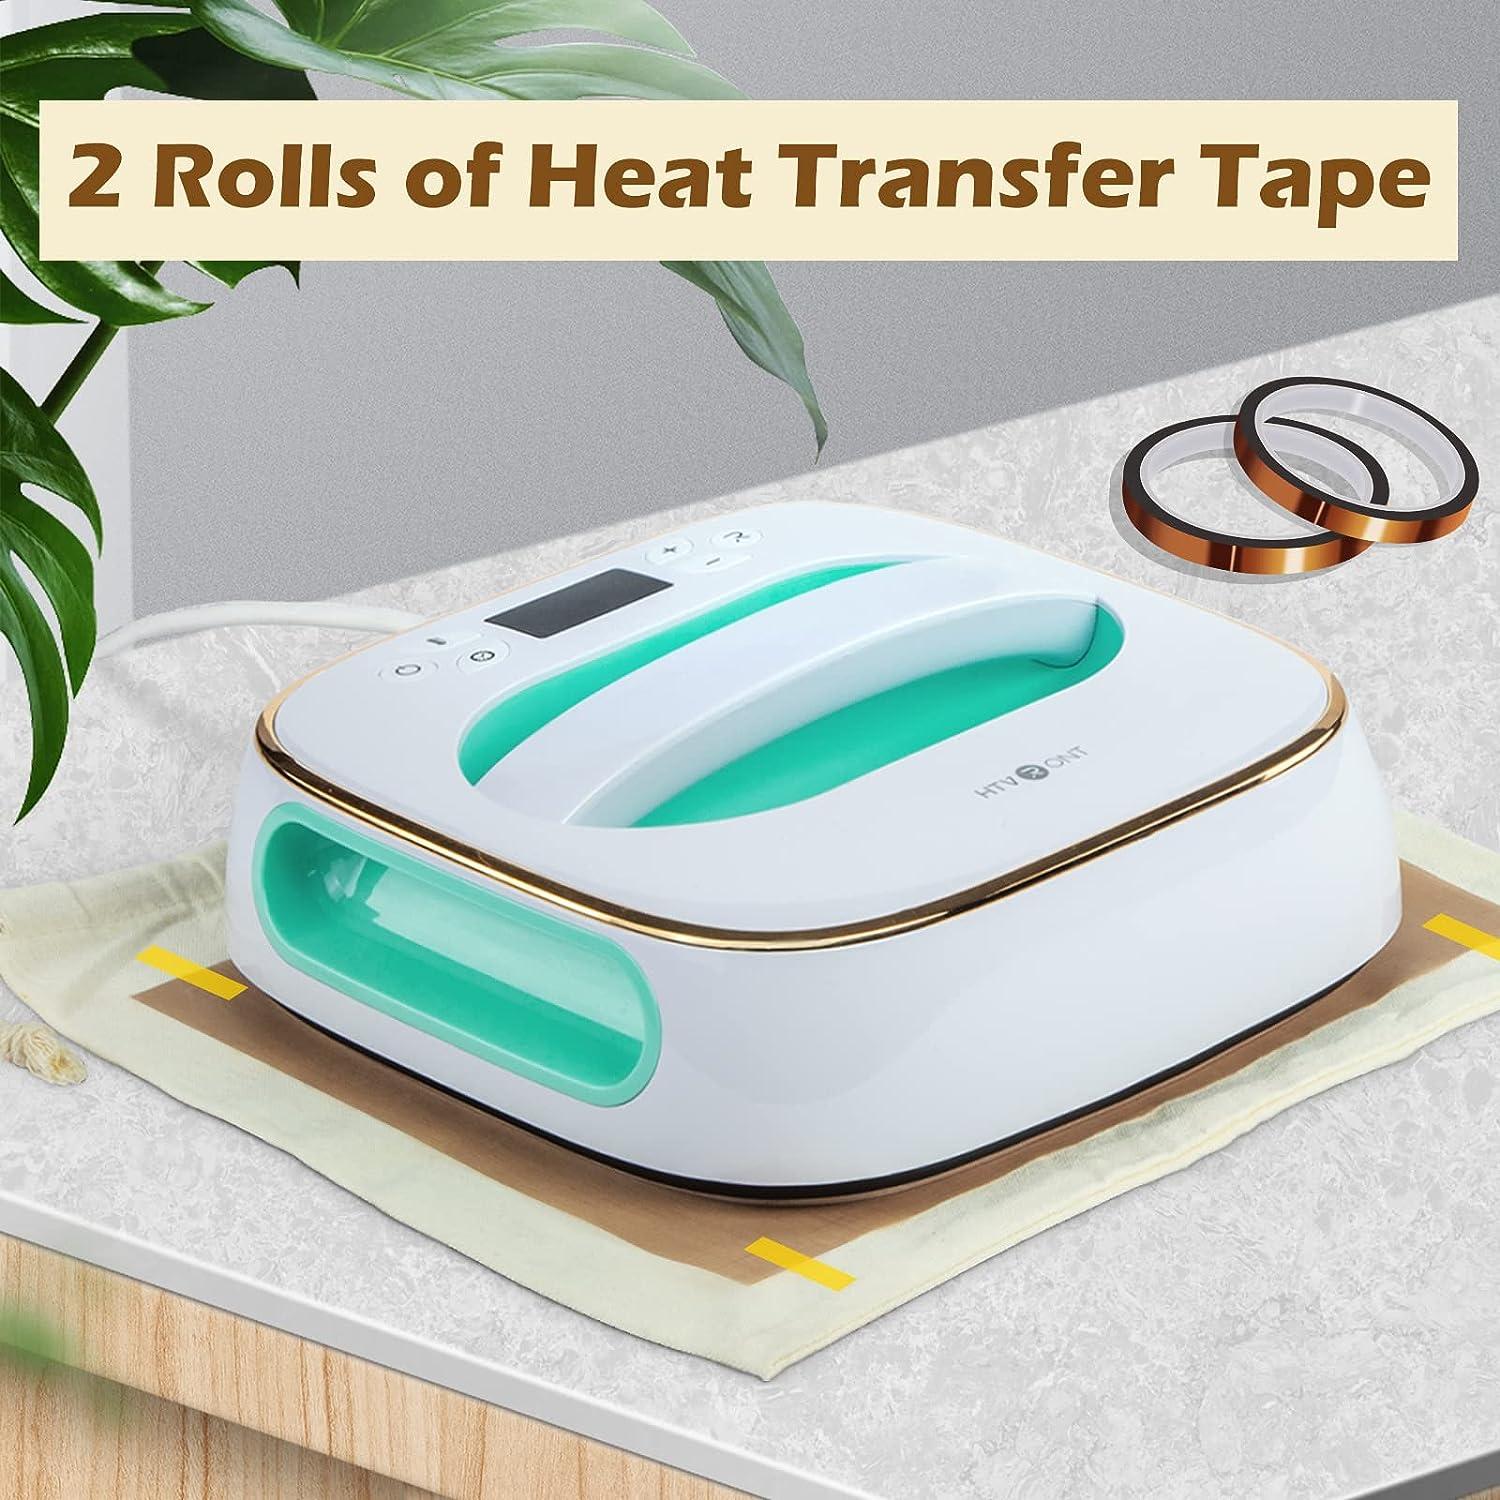 Cricut Strong Heat-Resistant Tape for Crafting Projects